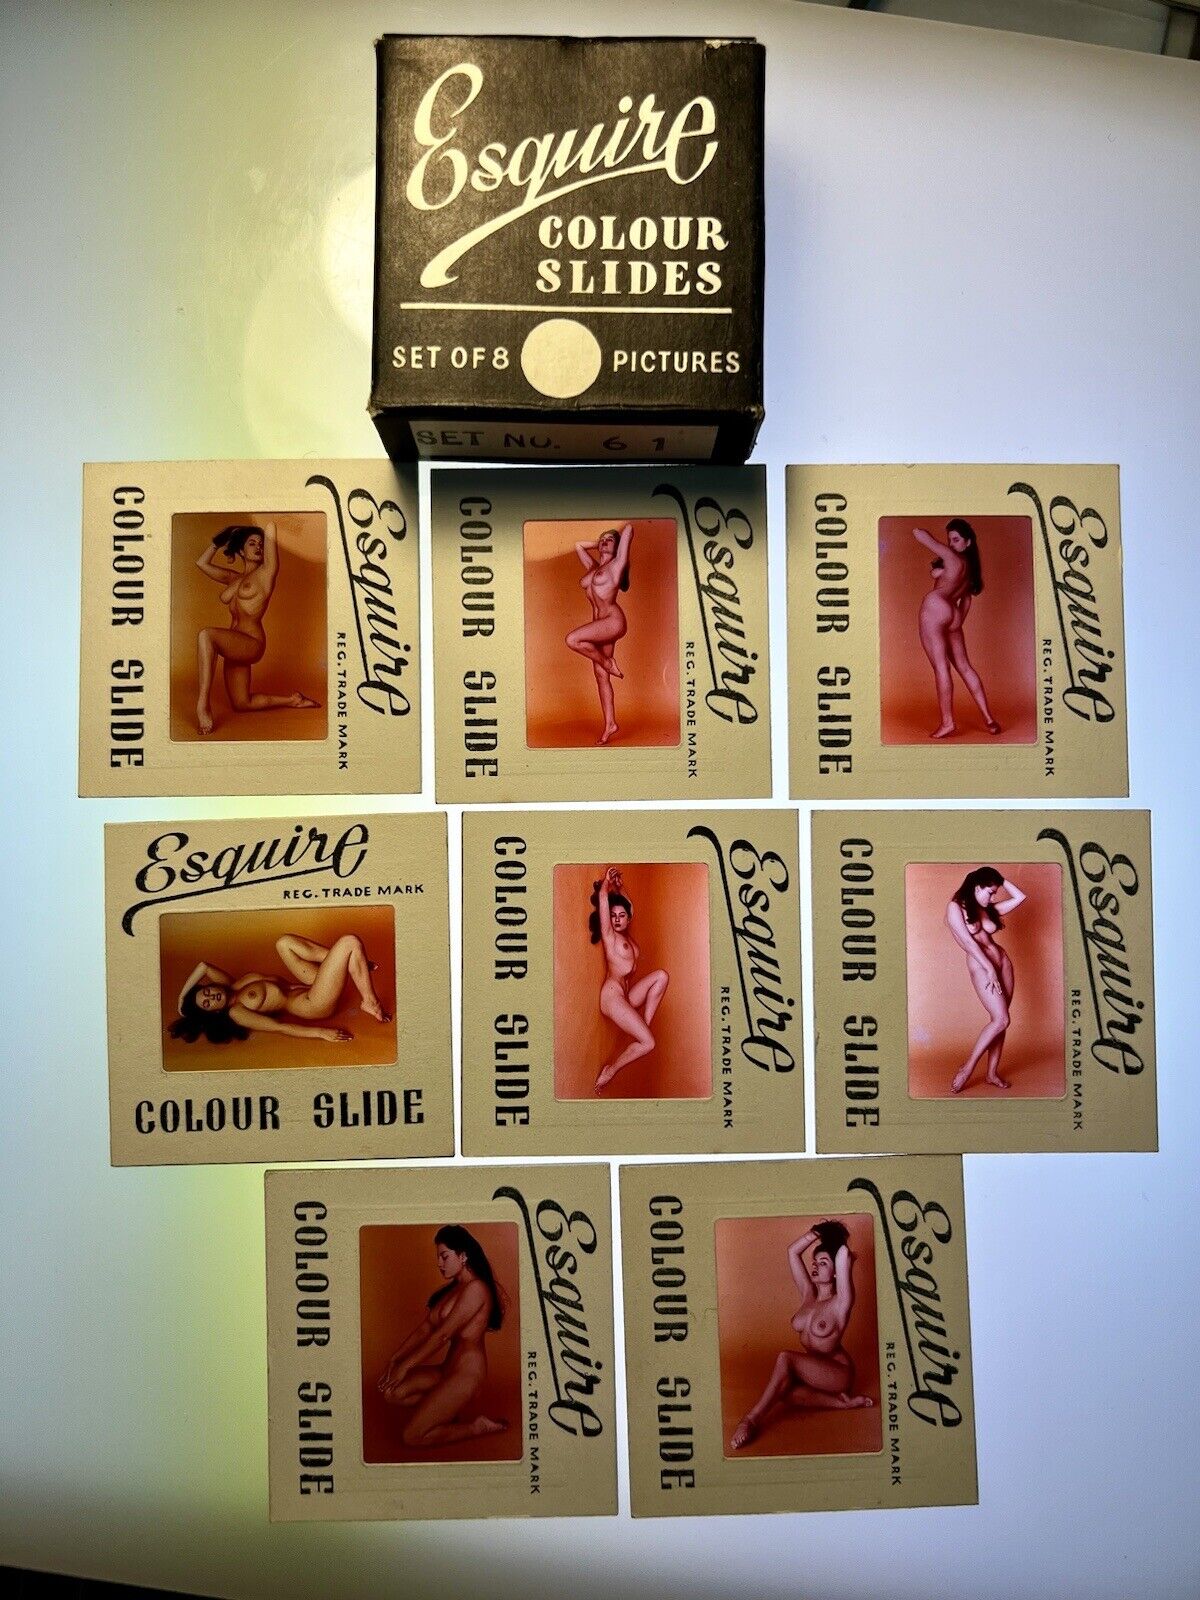 Vtg 60’s 35mm June Palmer Slides Transparency Risque Pinup Busty Glamour Lot X8